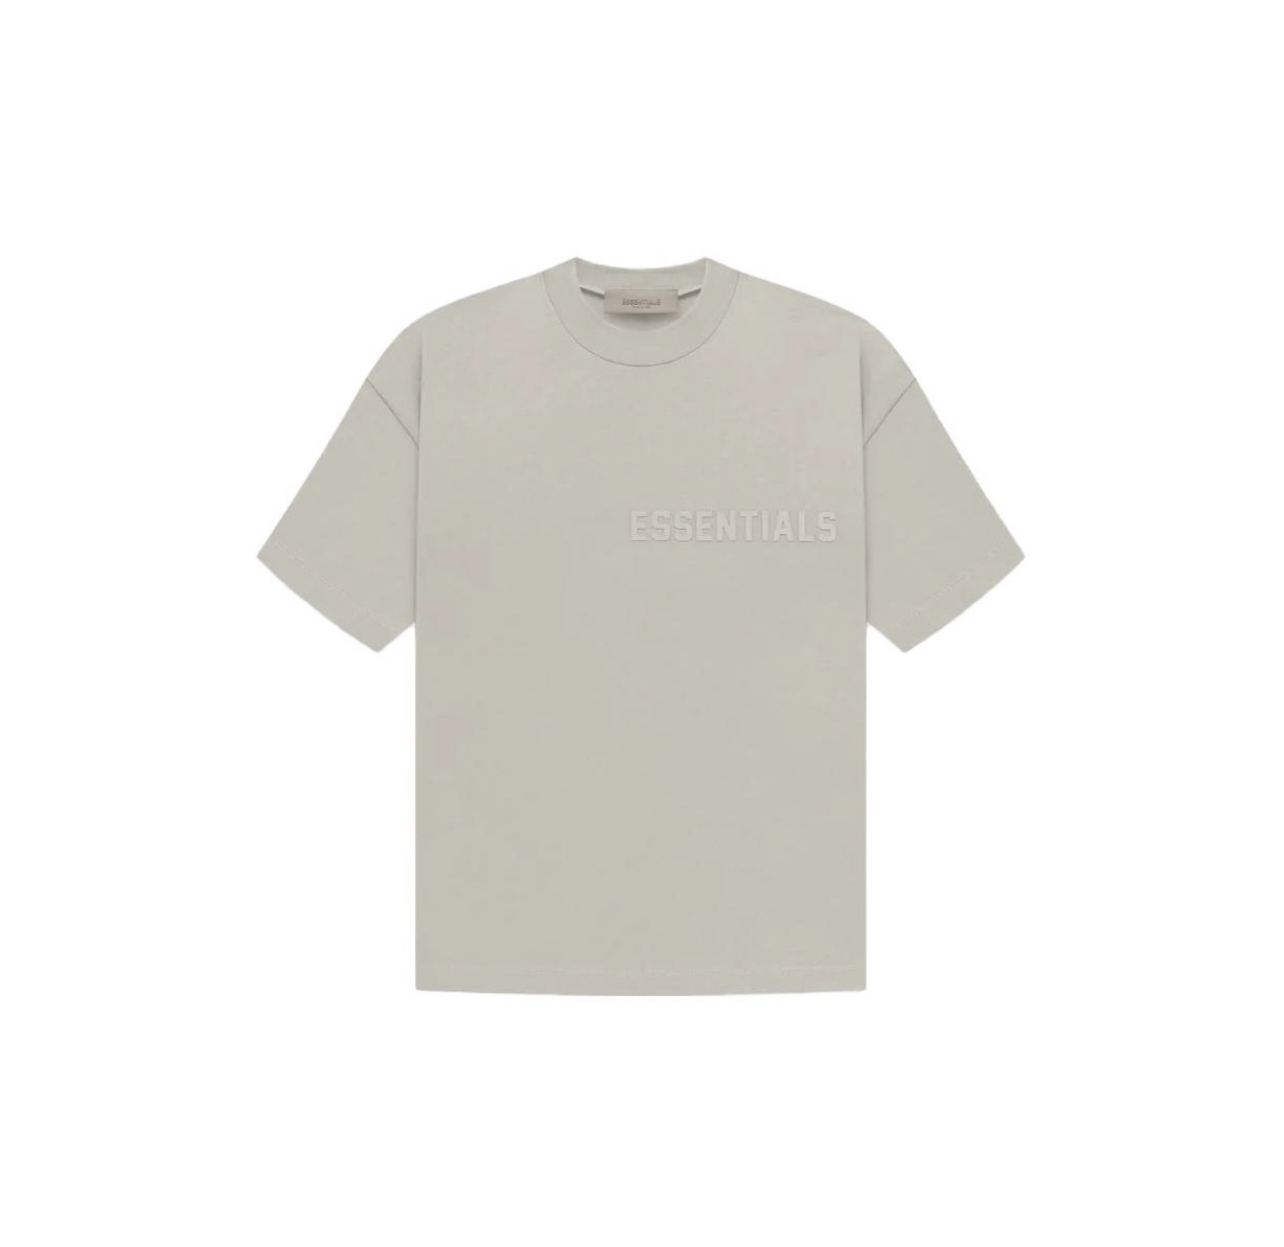 FEAR OF GOD ESSENTIALS FW22 SS22 SEAL TEE